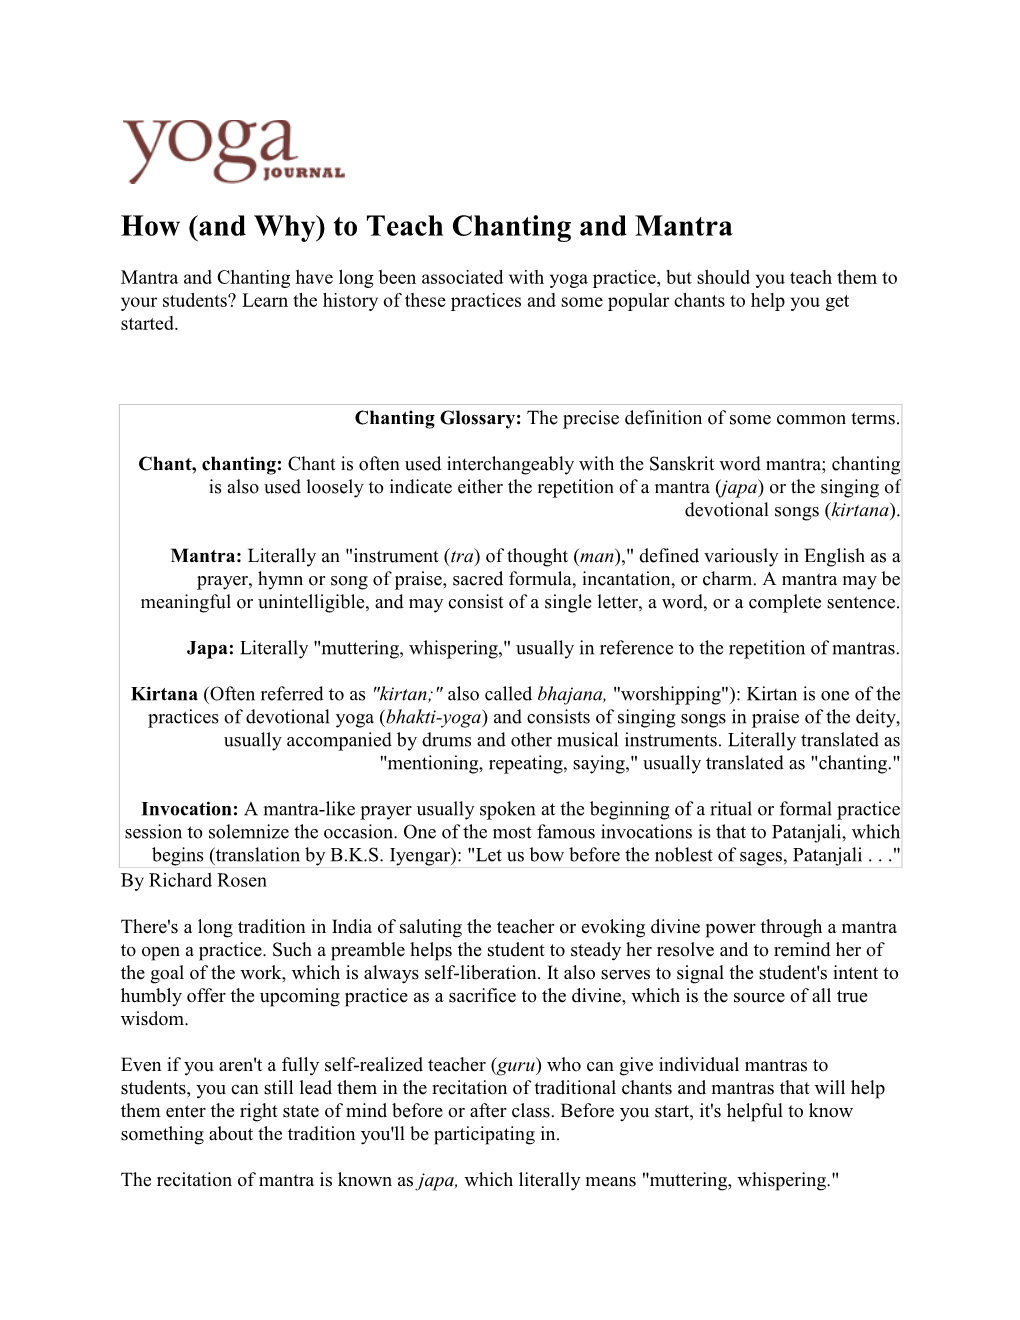 How (And Why) to Teach Chanting and Mantra